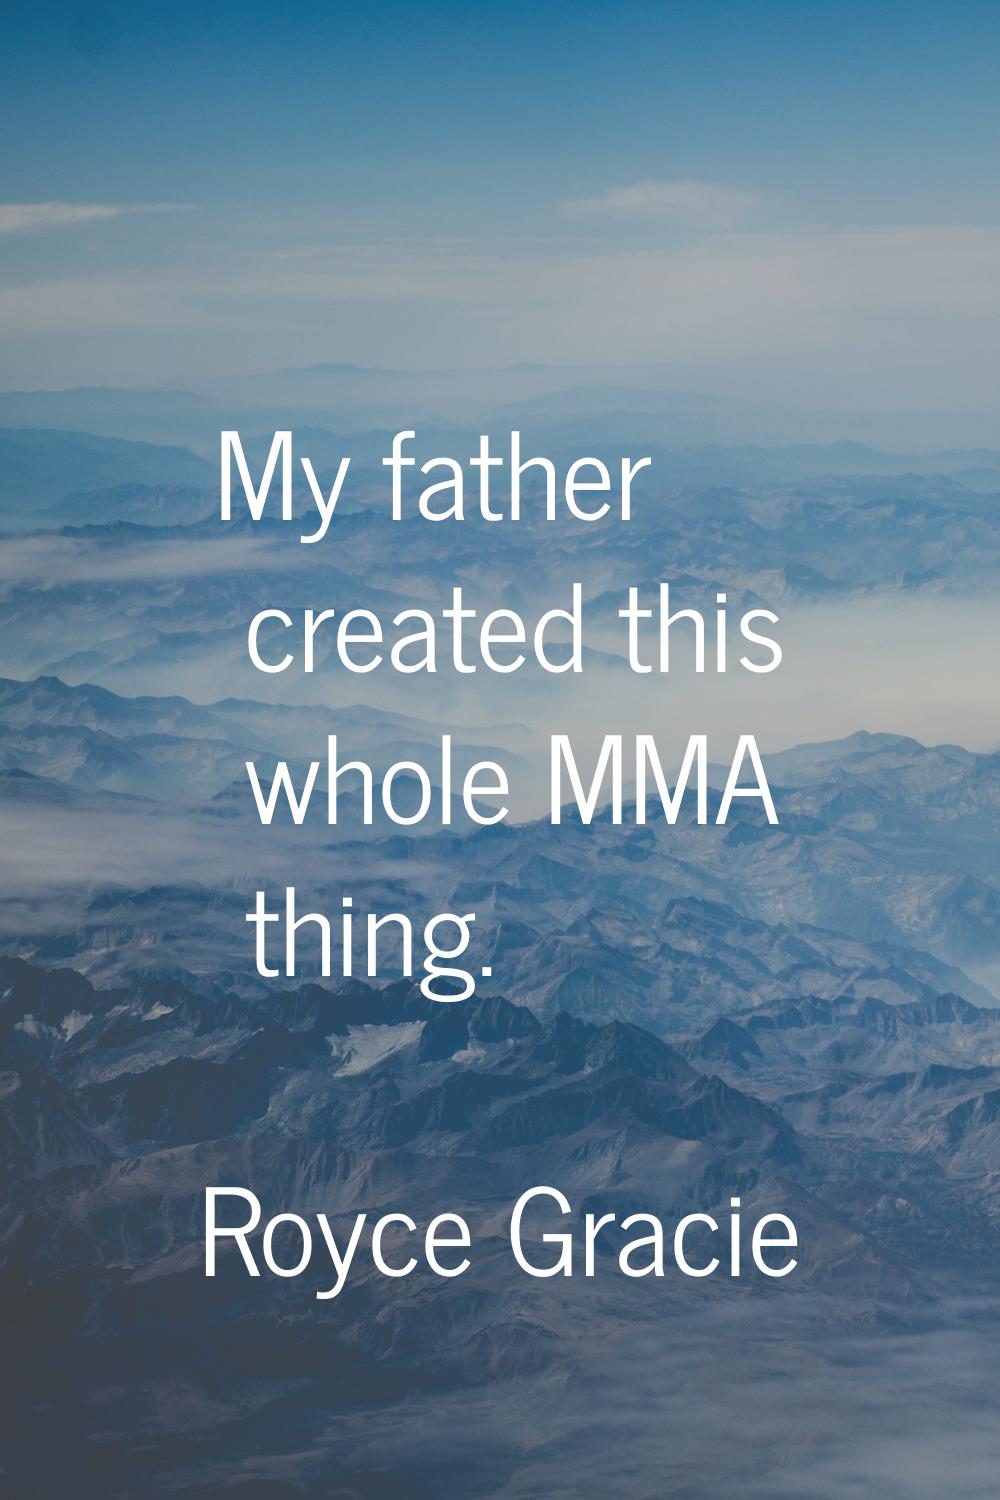 My father created this whole MMA thing.